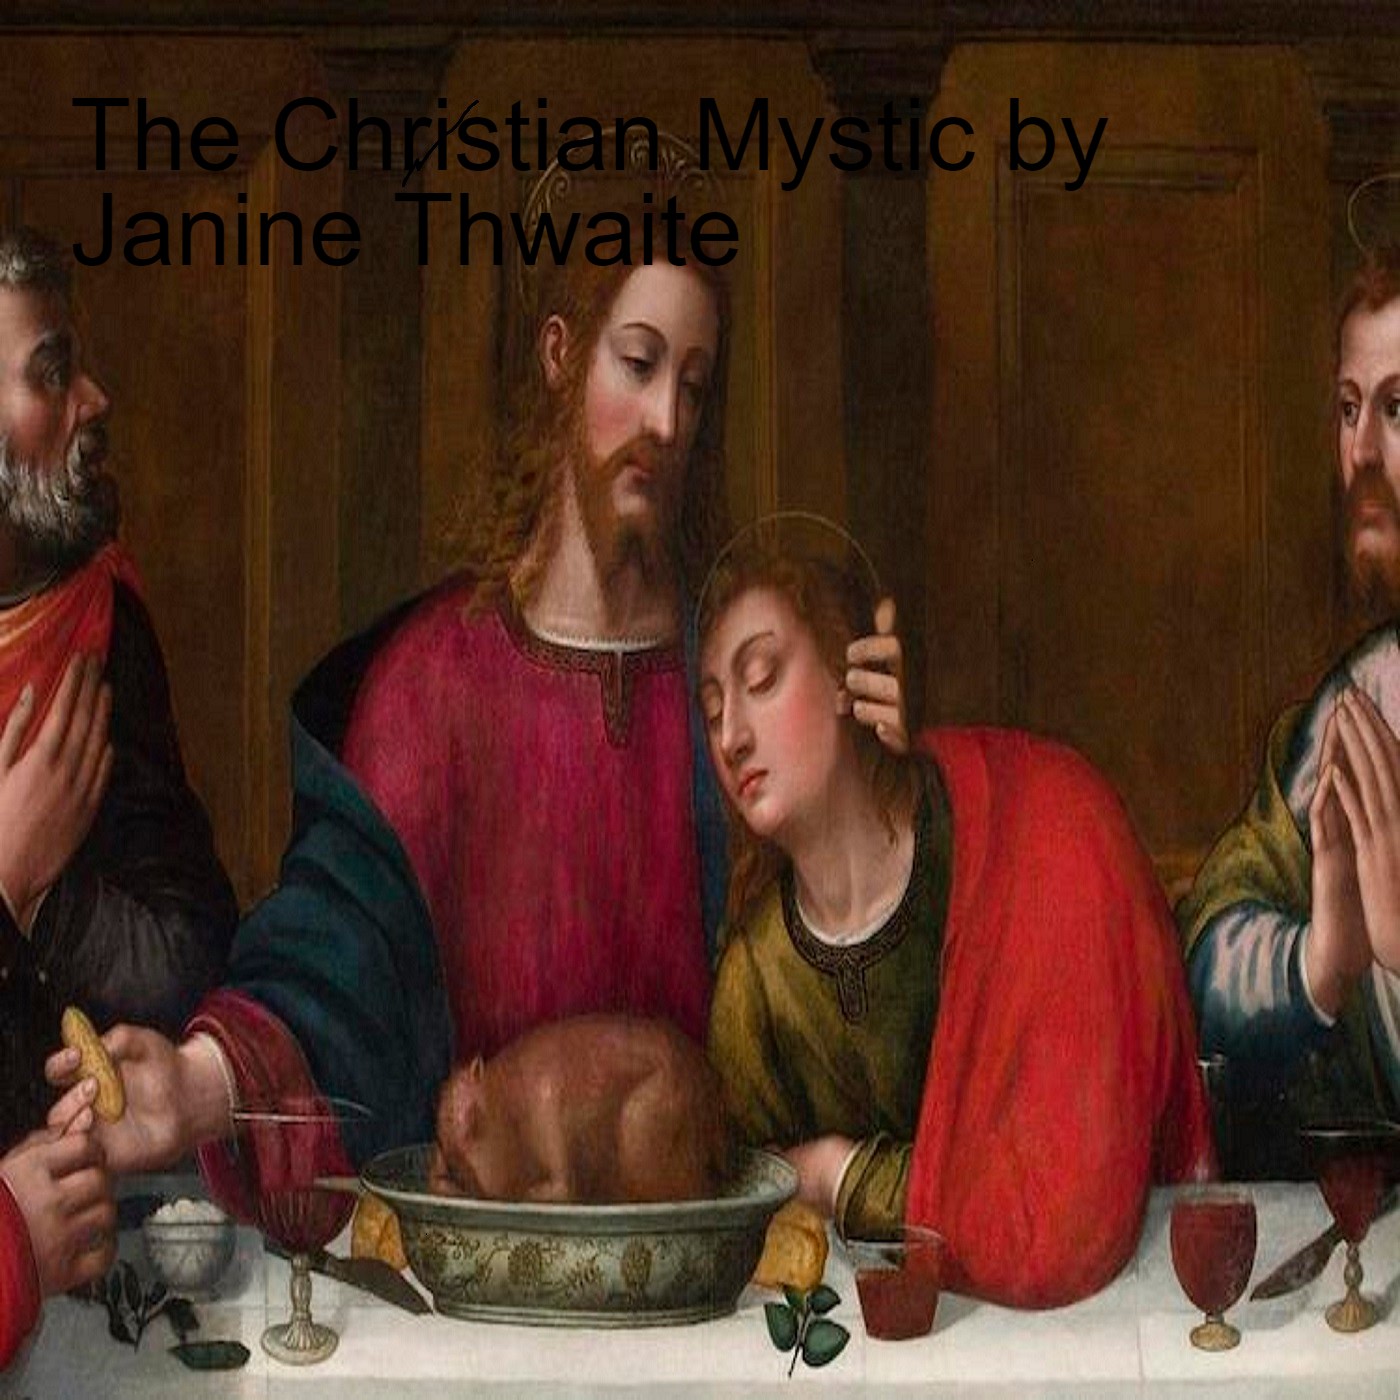 The Christian Mystic by Janine Thwaite